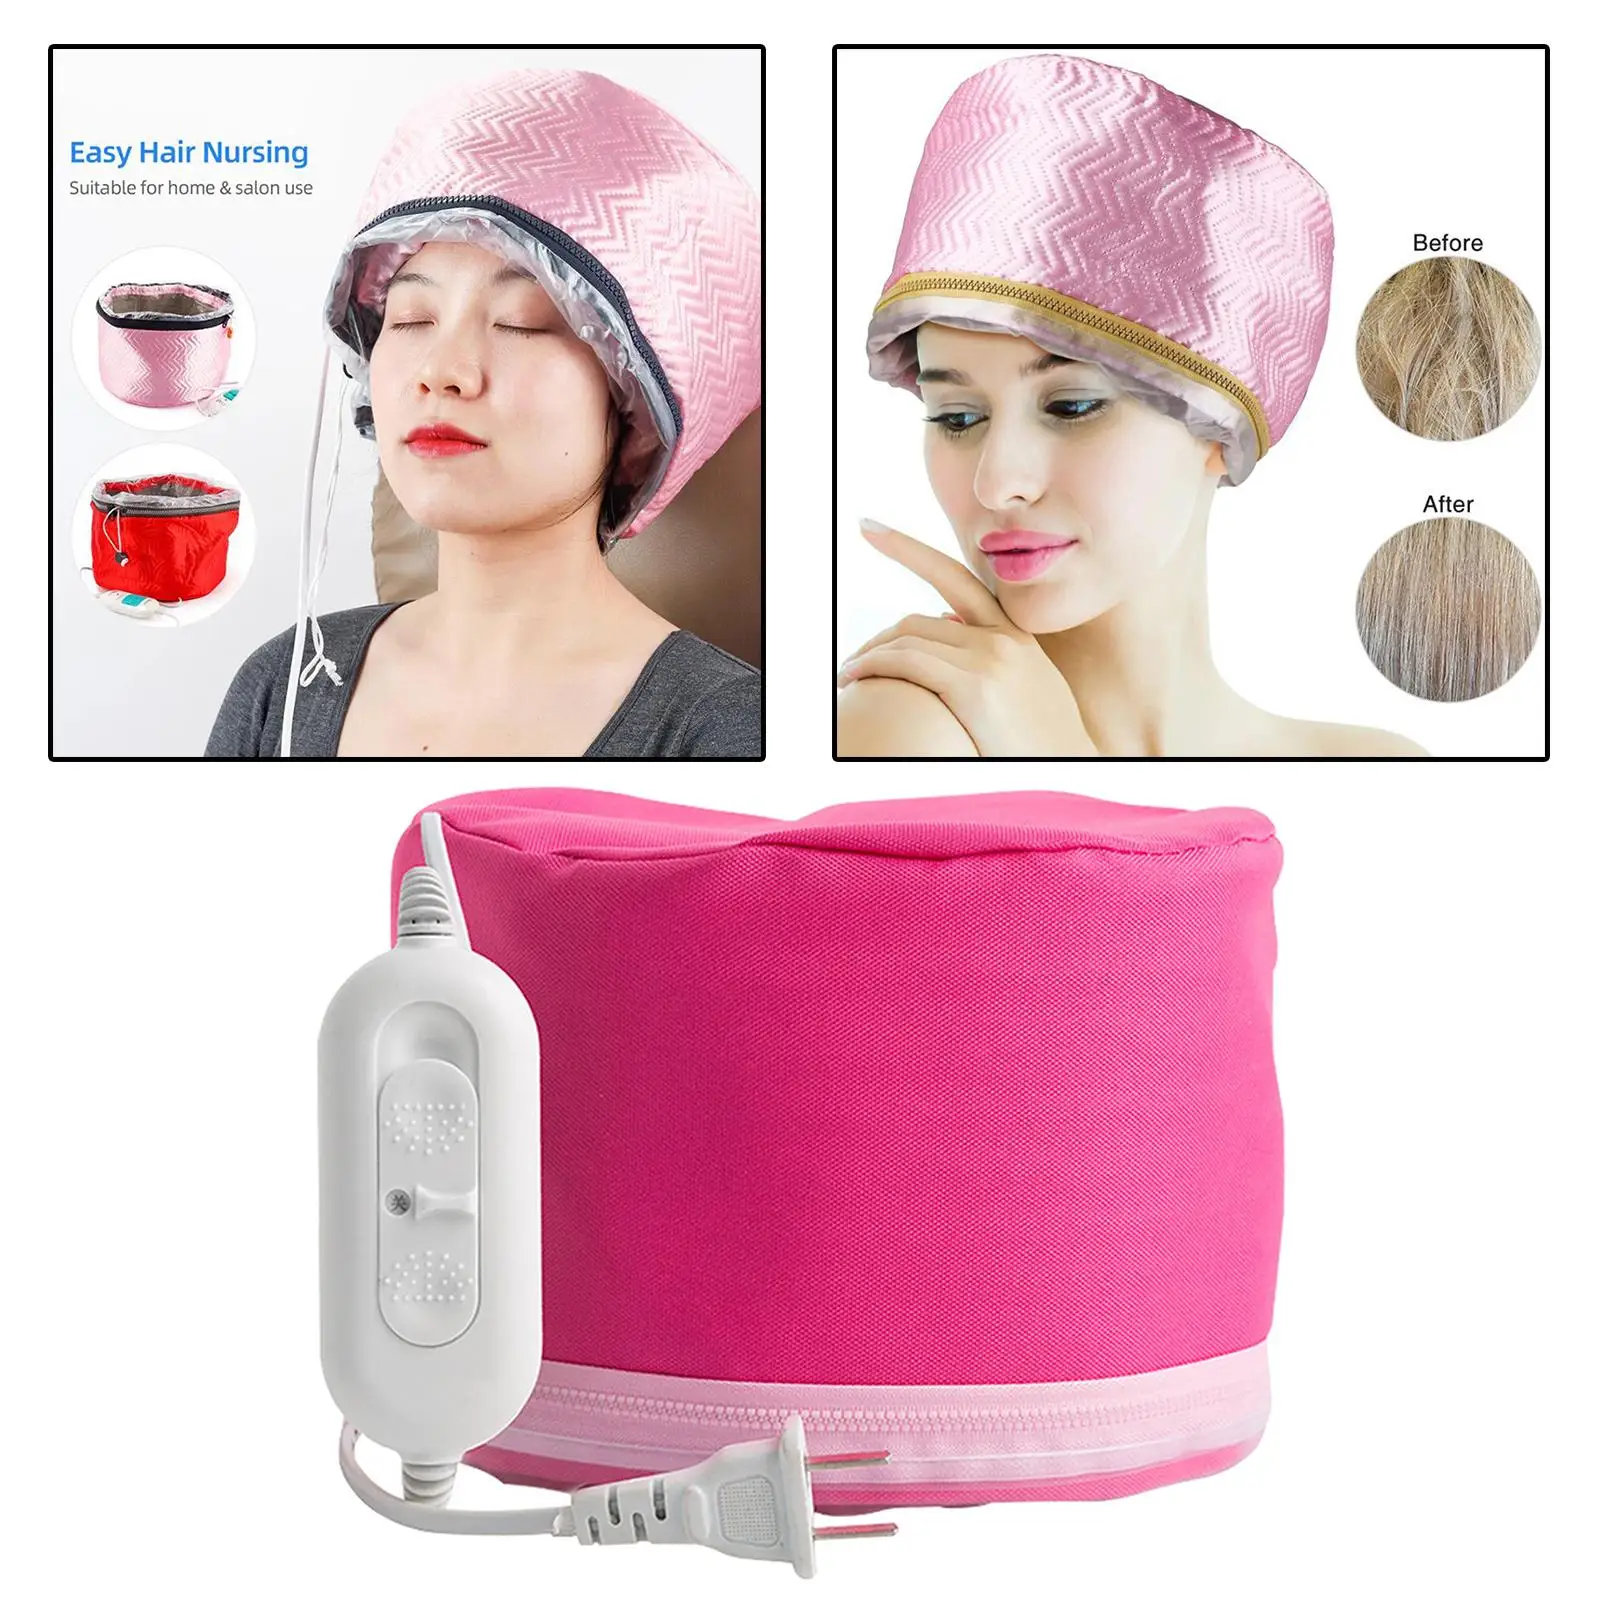 Hair Heating Caps Steamer 3-Mode Adjustable Hair Steamer Heating Hat for Deep Conditioning Home Salon Nursing Drying Teen Adults